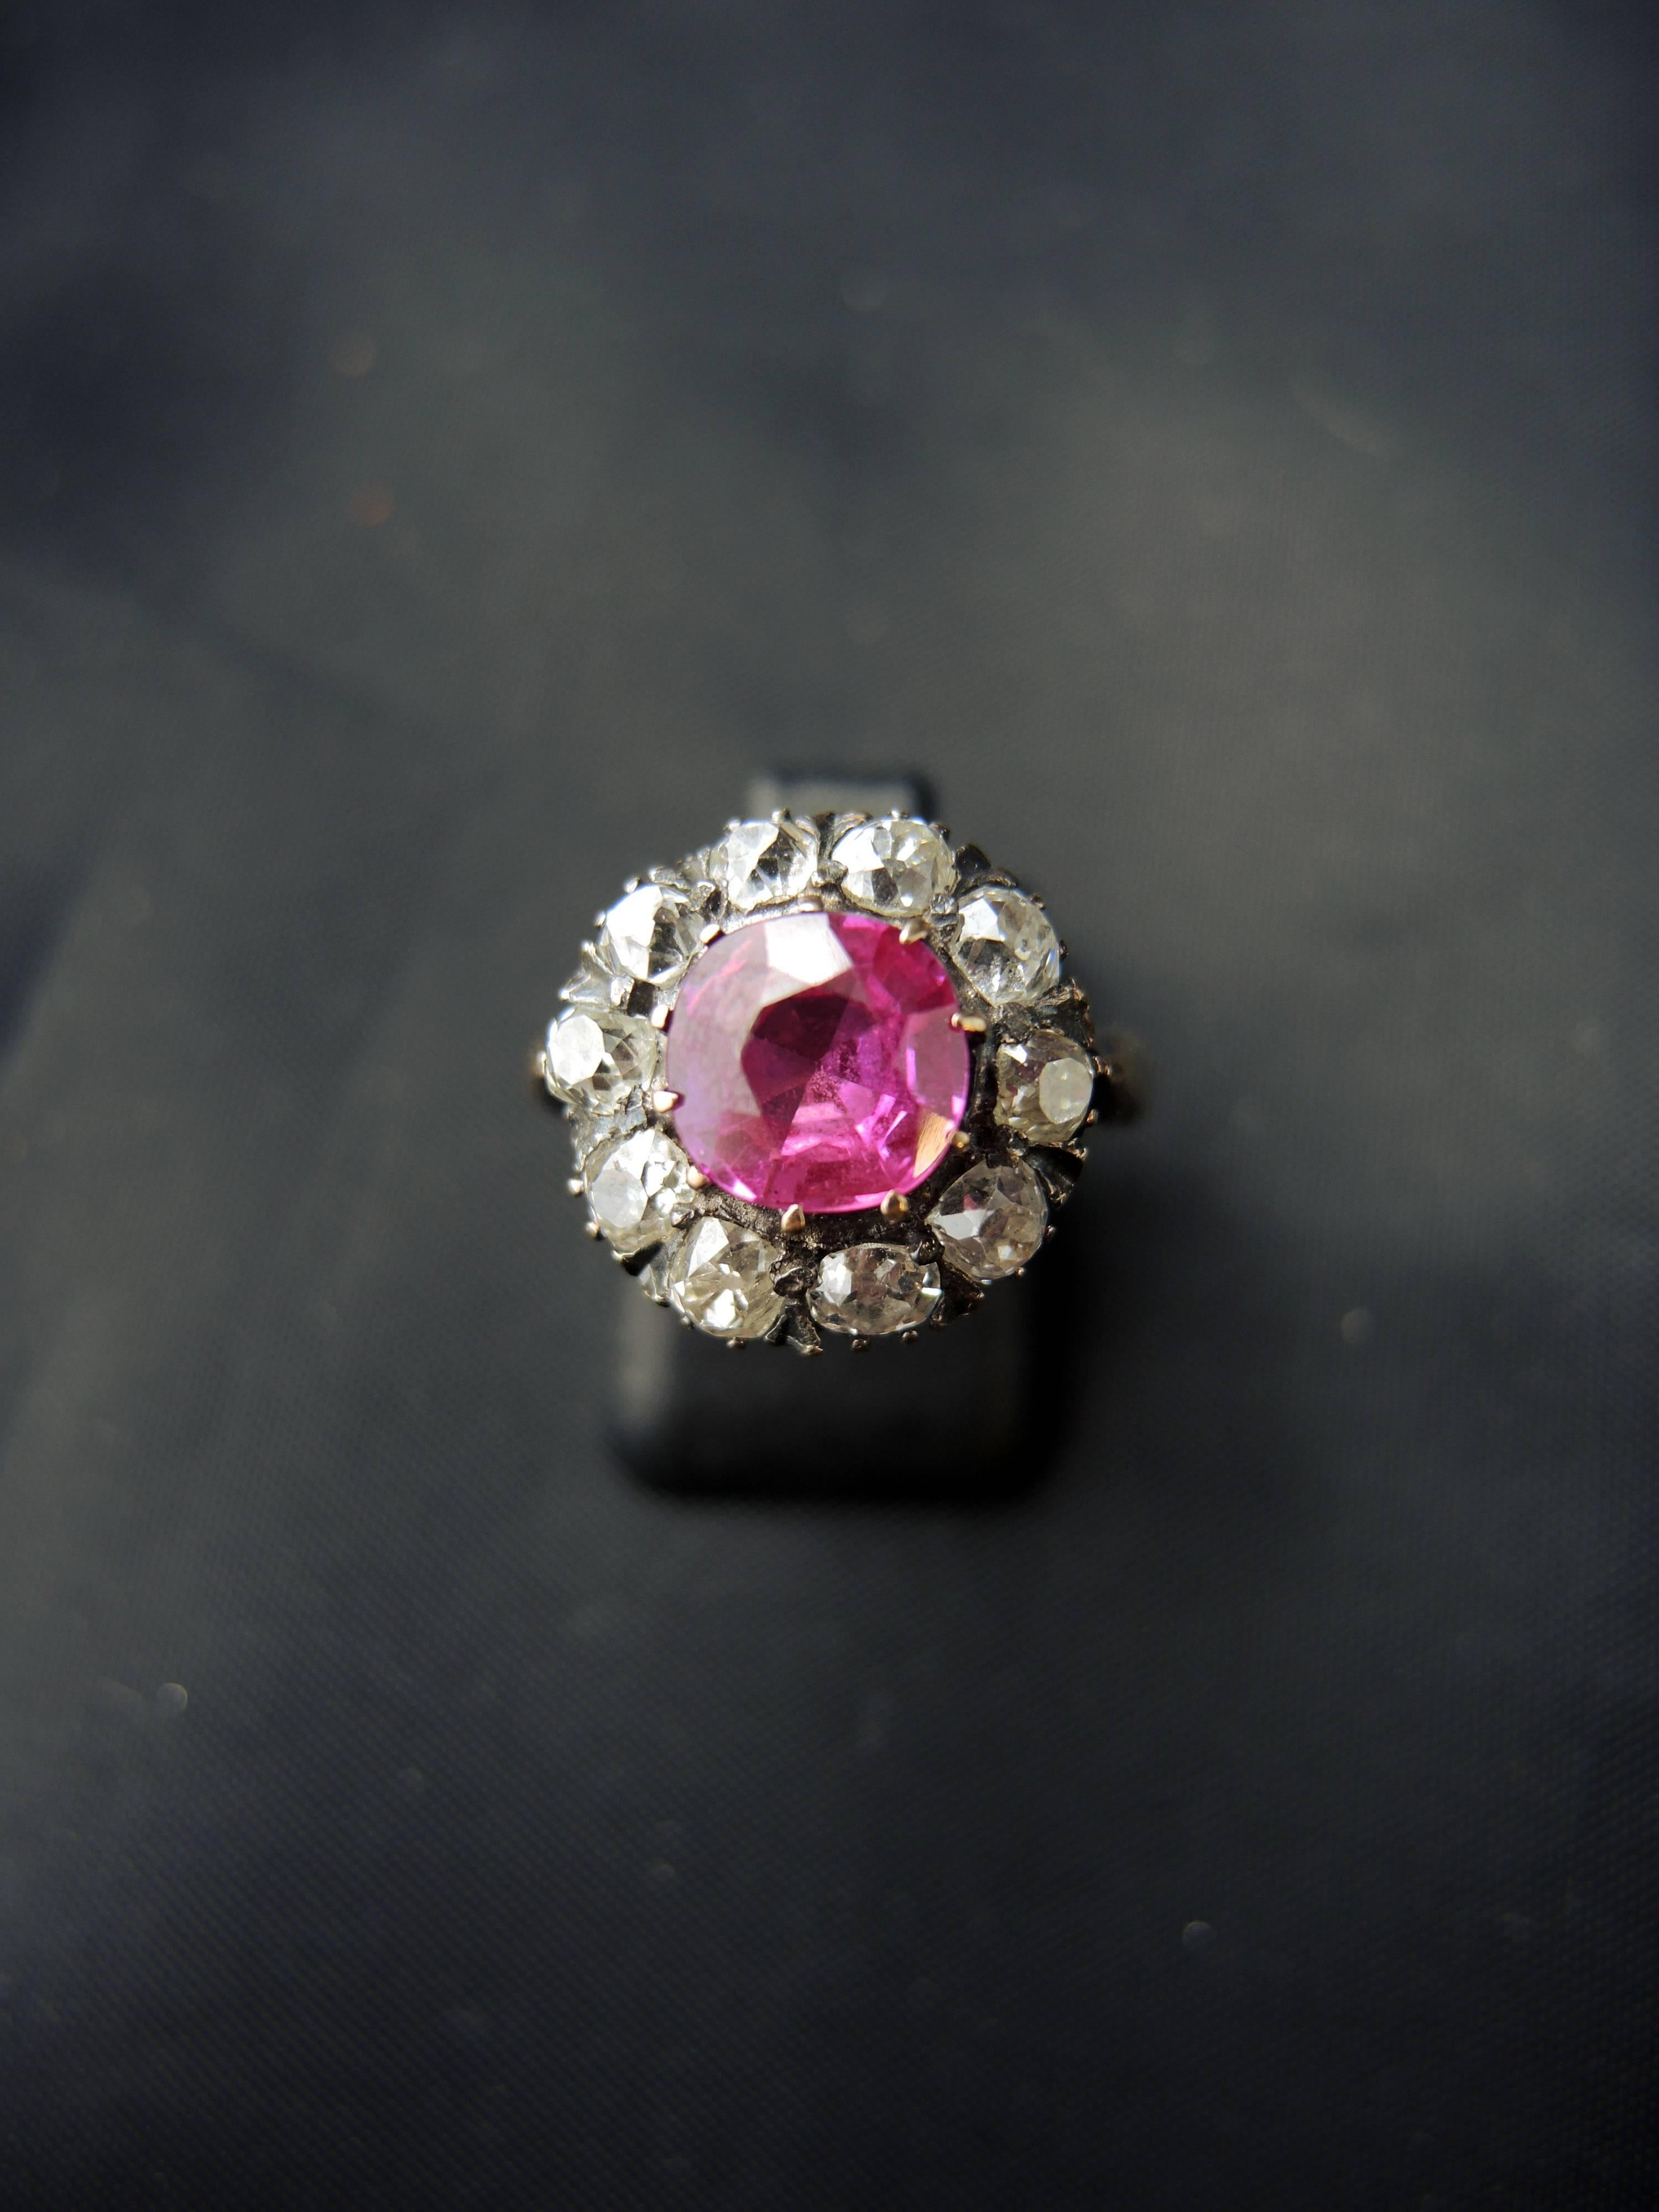 18kt rose gold and silver engagment Victorian cluster ring (quality mark: owl) set with a red stone (synthetic ruby) surounded with old cut diamonds.
Total diamonds weight estimated for around 1,30 Ct. 

Victorian work from the mid 19th